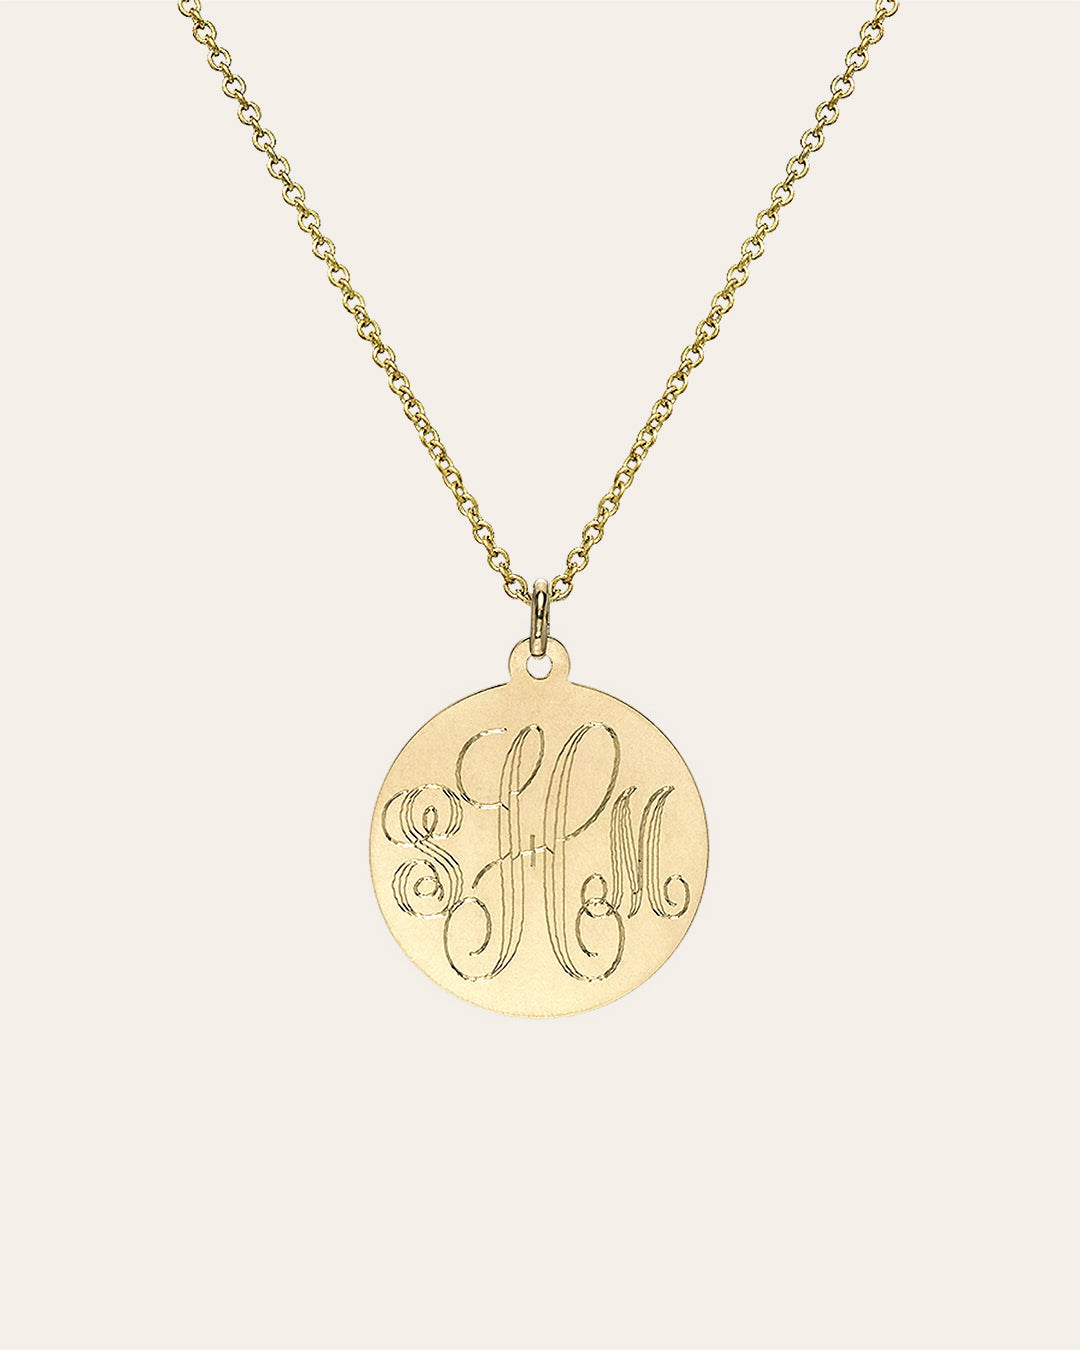 Monogram Necklaces - Exclusive Selection, See More